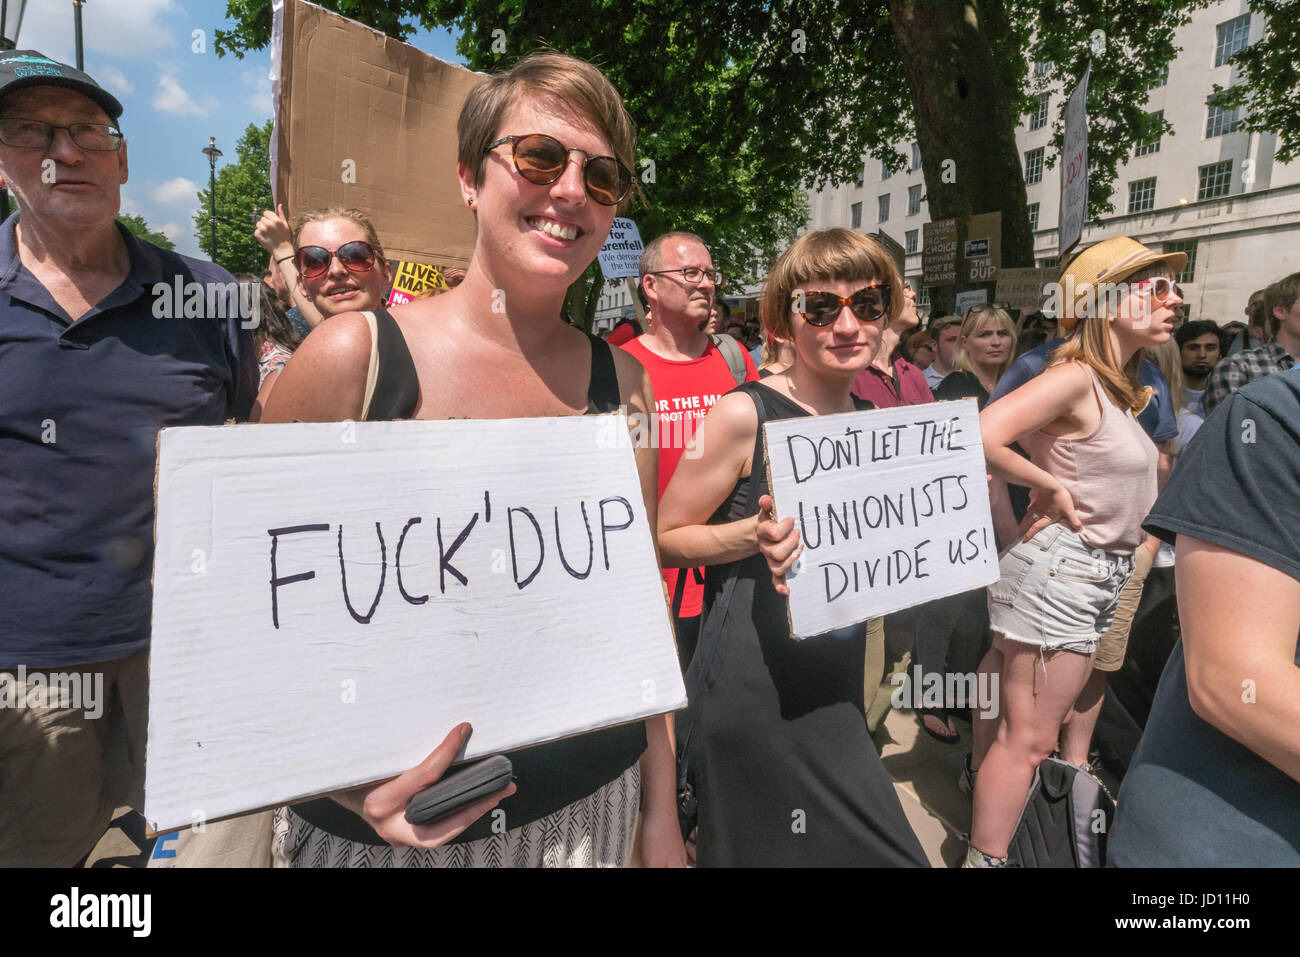 June 17, 2017 - London, UK - London, UK. 17th June, 2017. Women hold up posters against the DUP at the protest at Downing St calling on Theresa May to resign. Mostly made up of vocal supporters of Jeremy Corbyn, buoyed up by the election results which showed him to be eminently electable, there were speeches by Labour MPs Marsha De Cordova who gained Battersea from the Conservatives, Rupa Huq who greatly increased her tiny majority and Shadow Education Secretary Angela Rayner. There were others who spoke about the DUP, as a party intrinsically linked with Protestant terrorist groups and domina Stock Photo